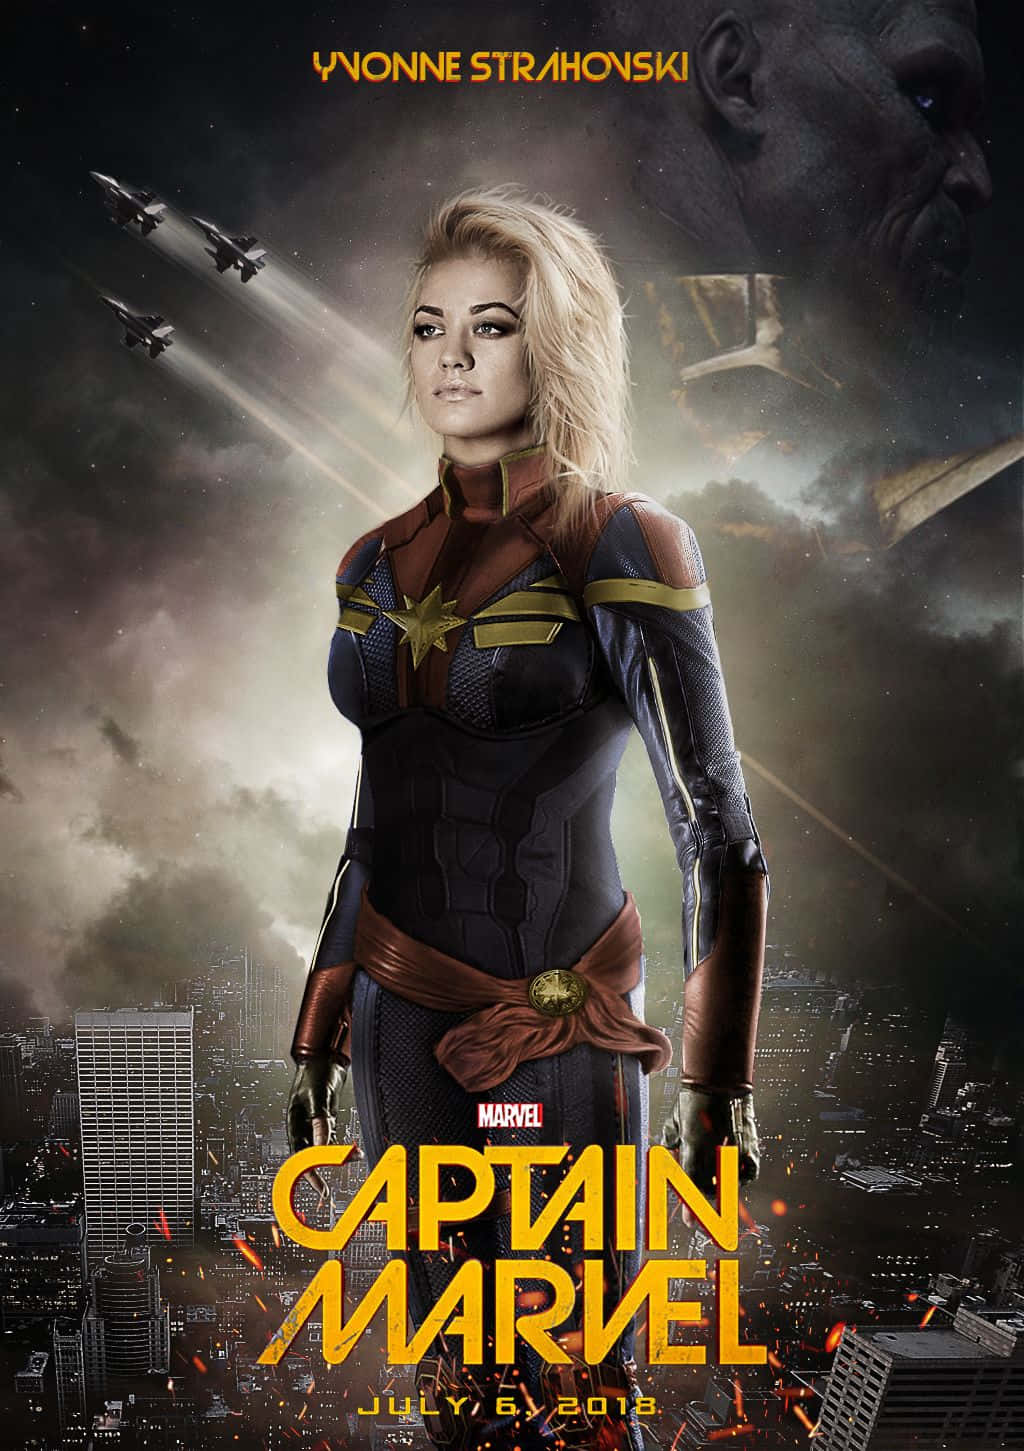 Don't miss the long-awaited sequel of the Marvel Cinematic Universe blockbuster – Captain Marvel 2! Wallpaper